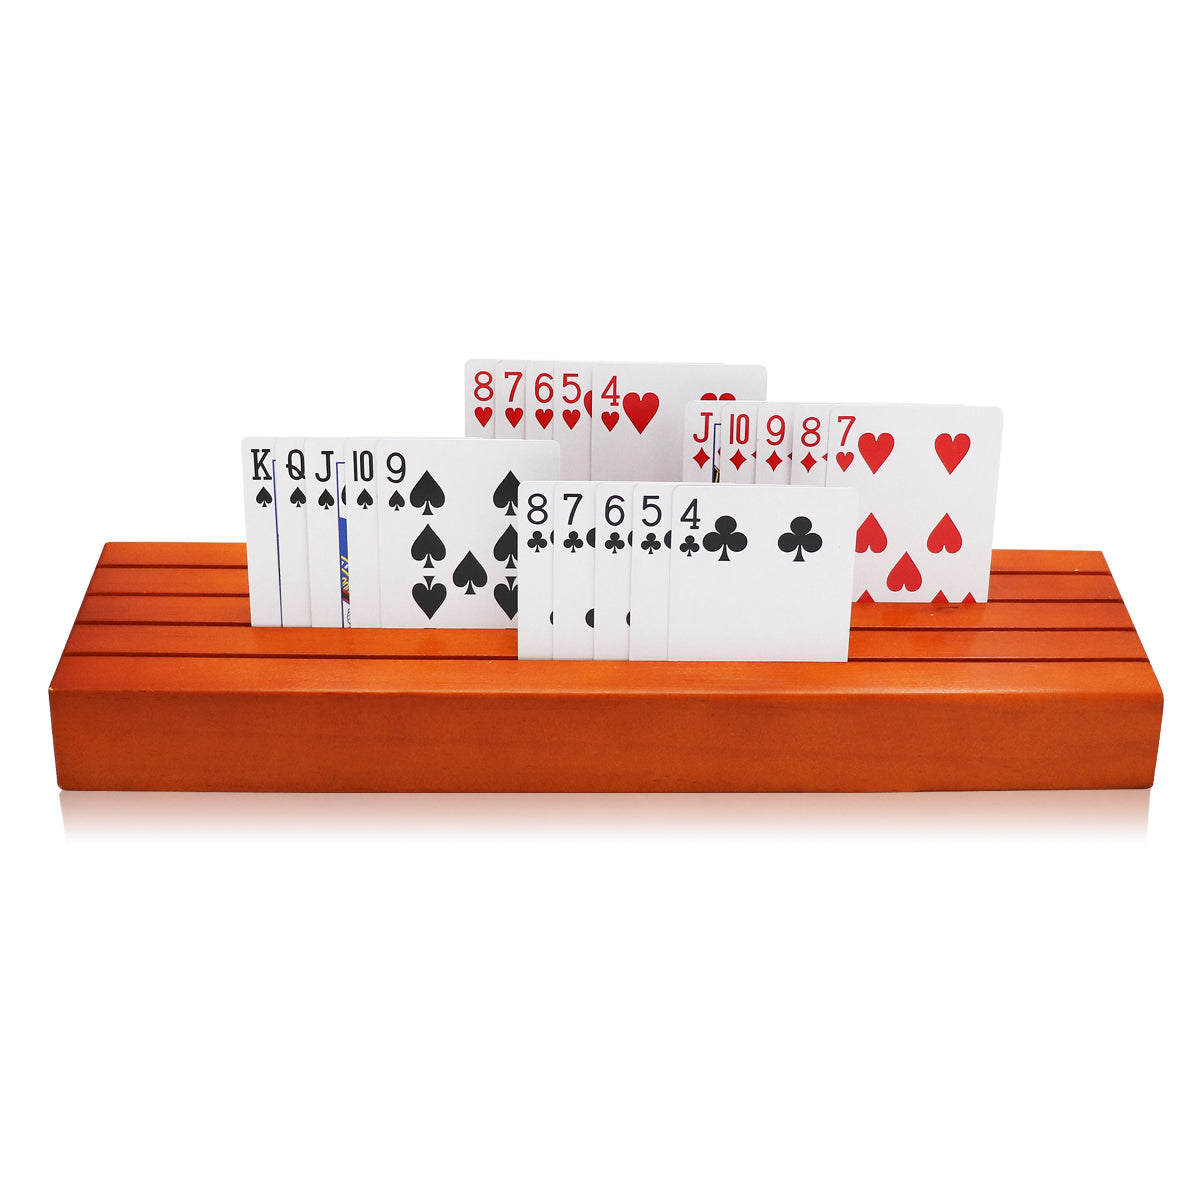  GSE Wooden Playing Card Holders Tray Racks Organizer Set for  Kids Seniors Adults, Wood Playing Card Tray Racks for Bridge Canasta UNO  Card Playing (6-inch, 2-Pack) : Toys & Games